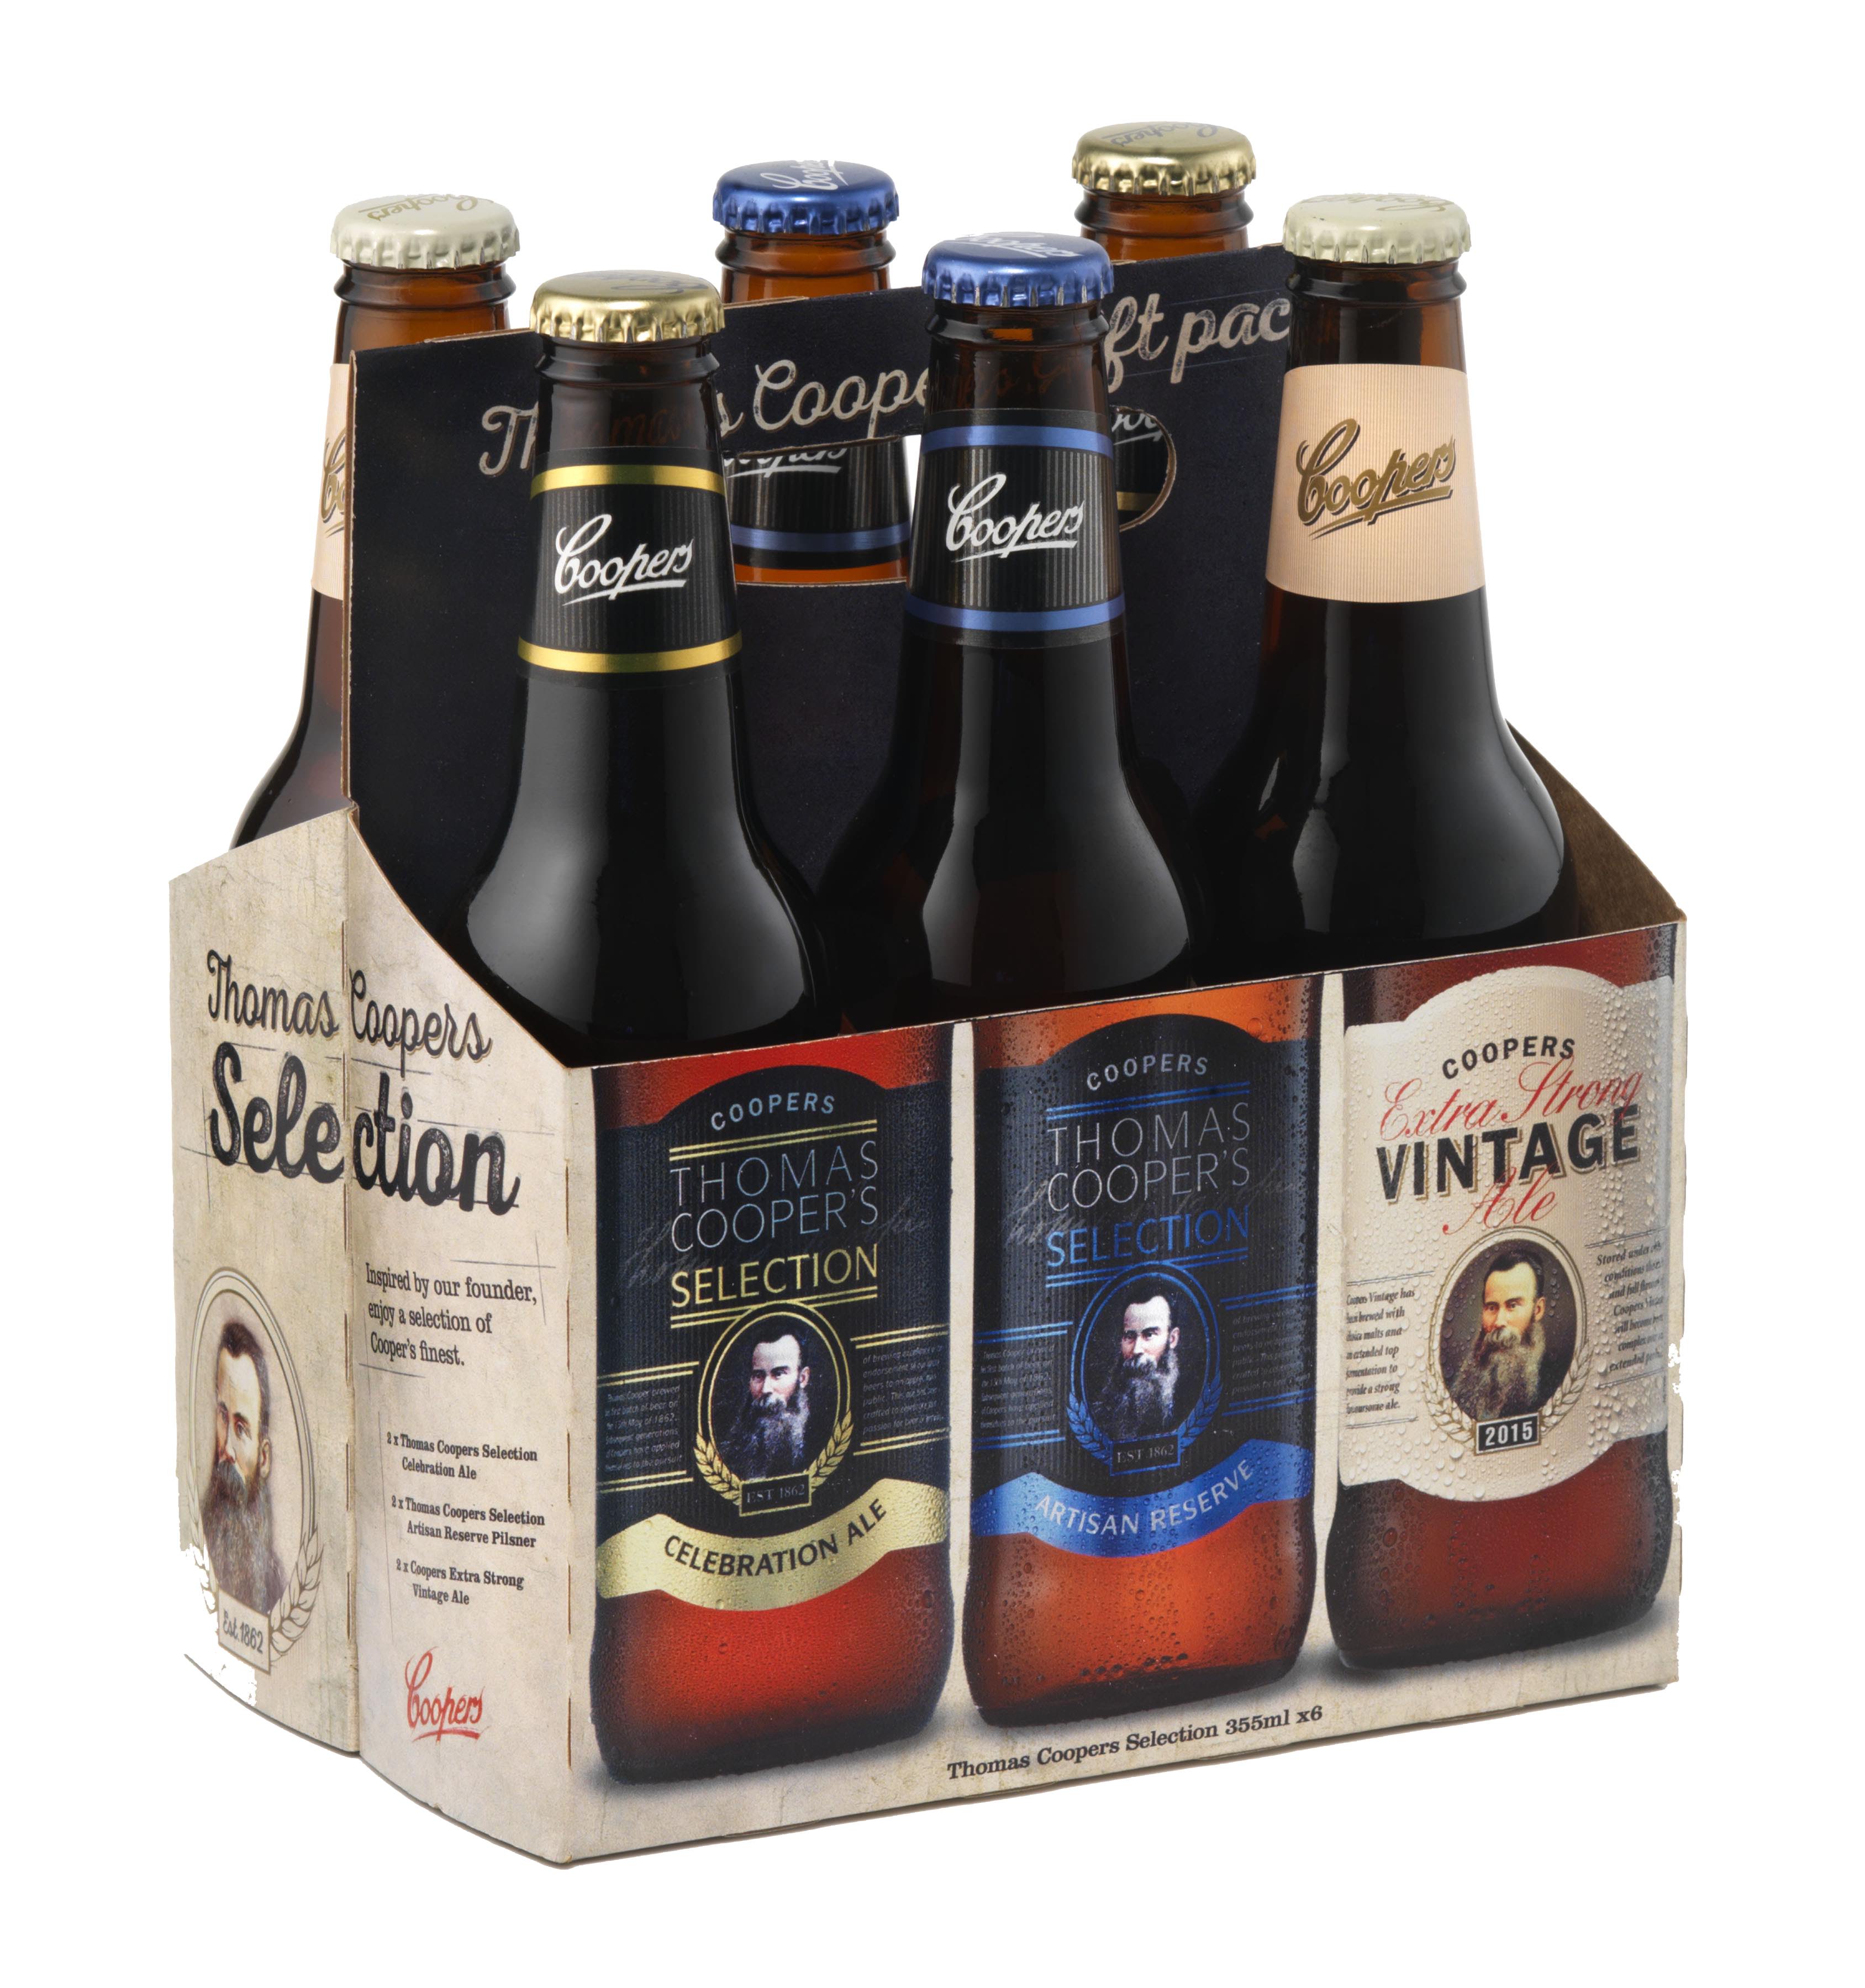 Thomas Cooper's Selection mixed six-pack